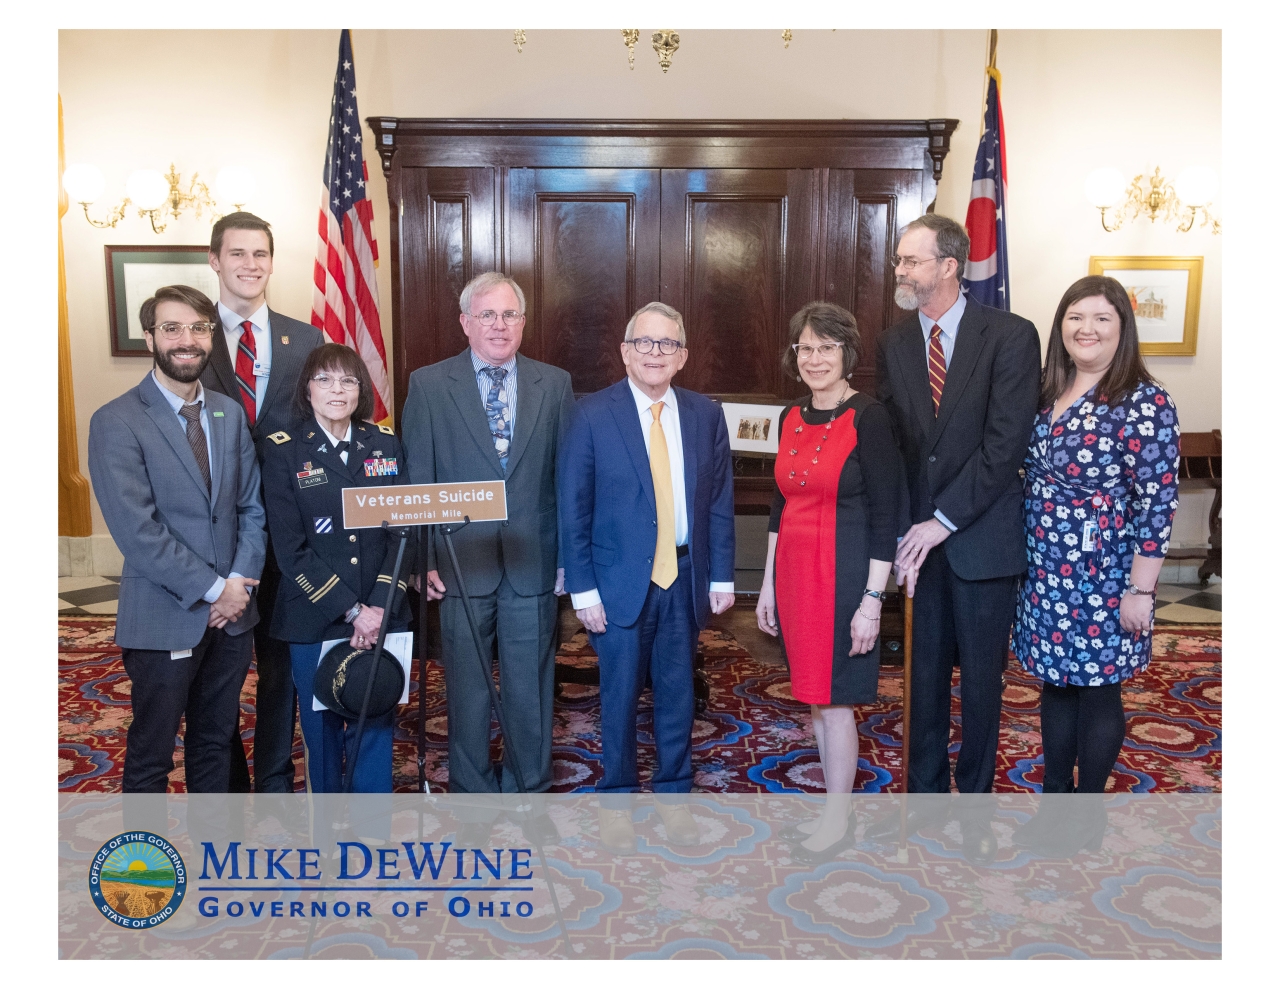 Posing with Gov. DeWine after signing a road naming bill raising awareness for veteran suicide